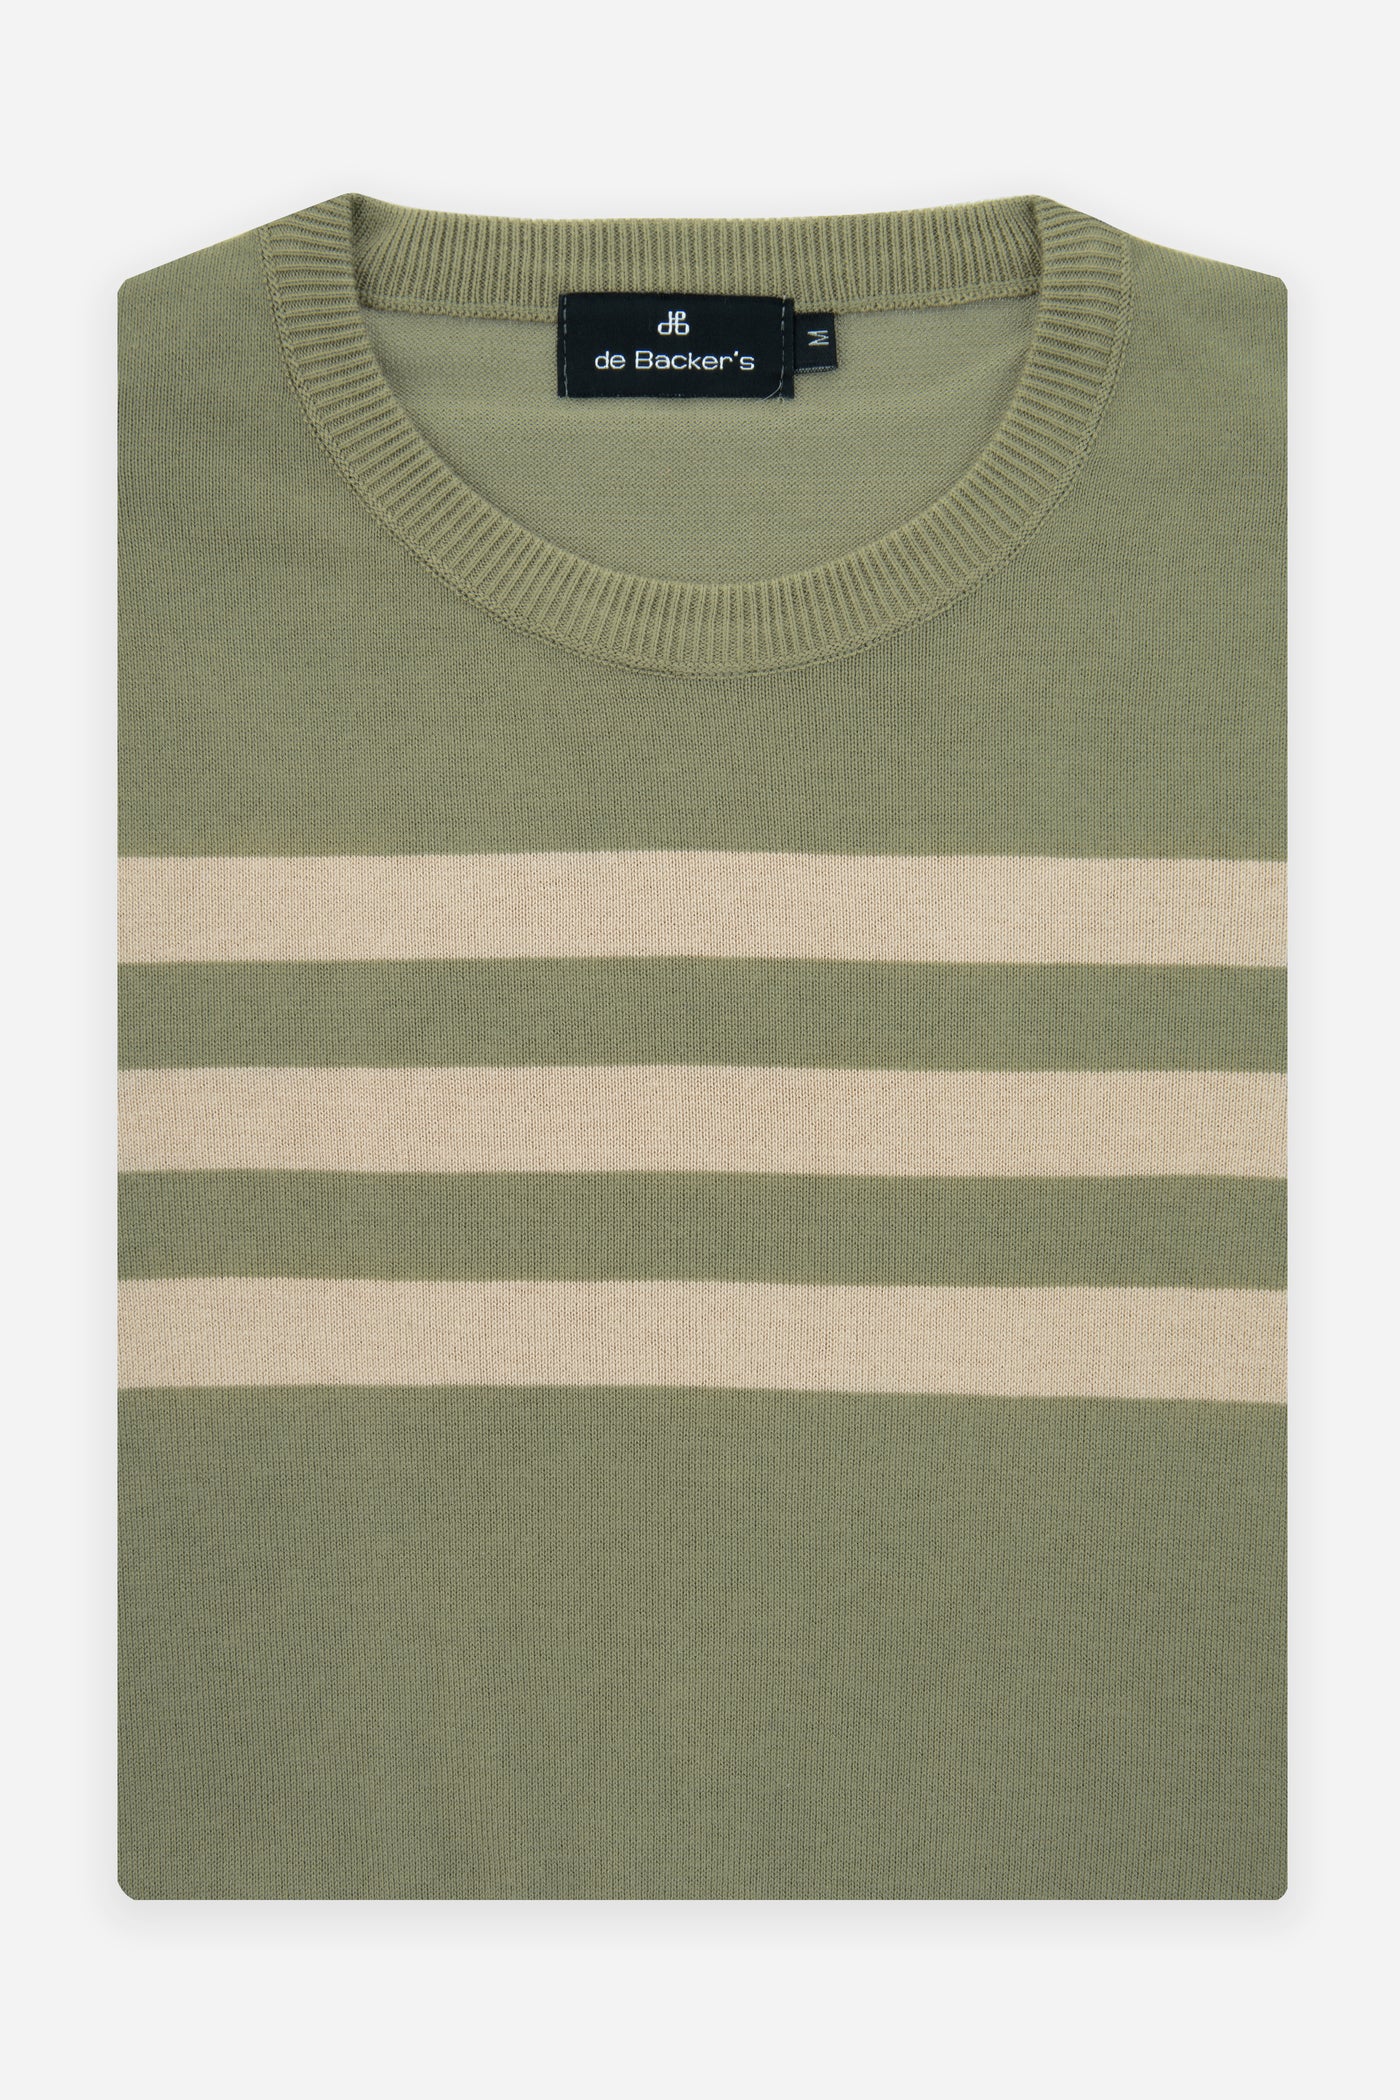 Striped Reseda Green & Beige Knitted Round T-Shirt